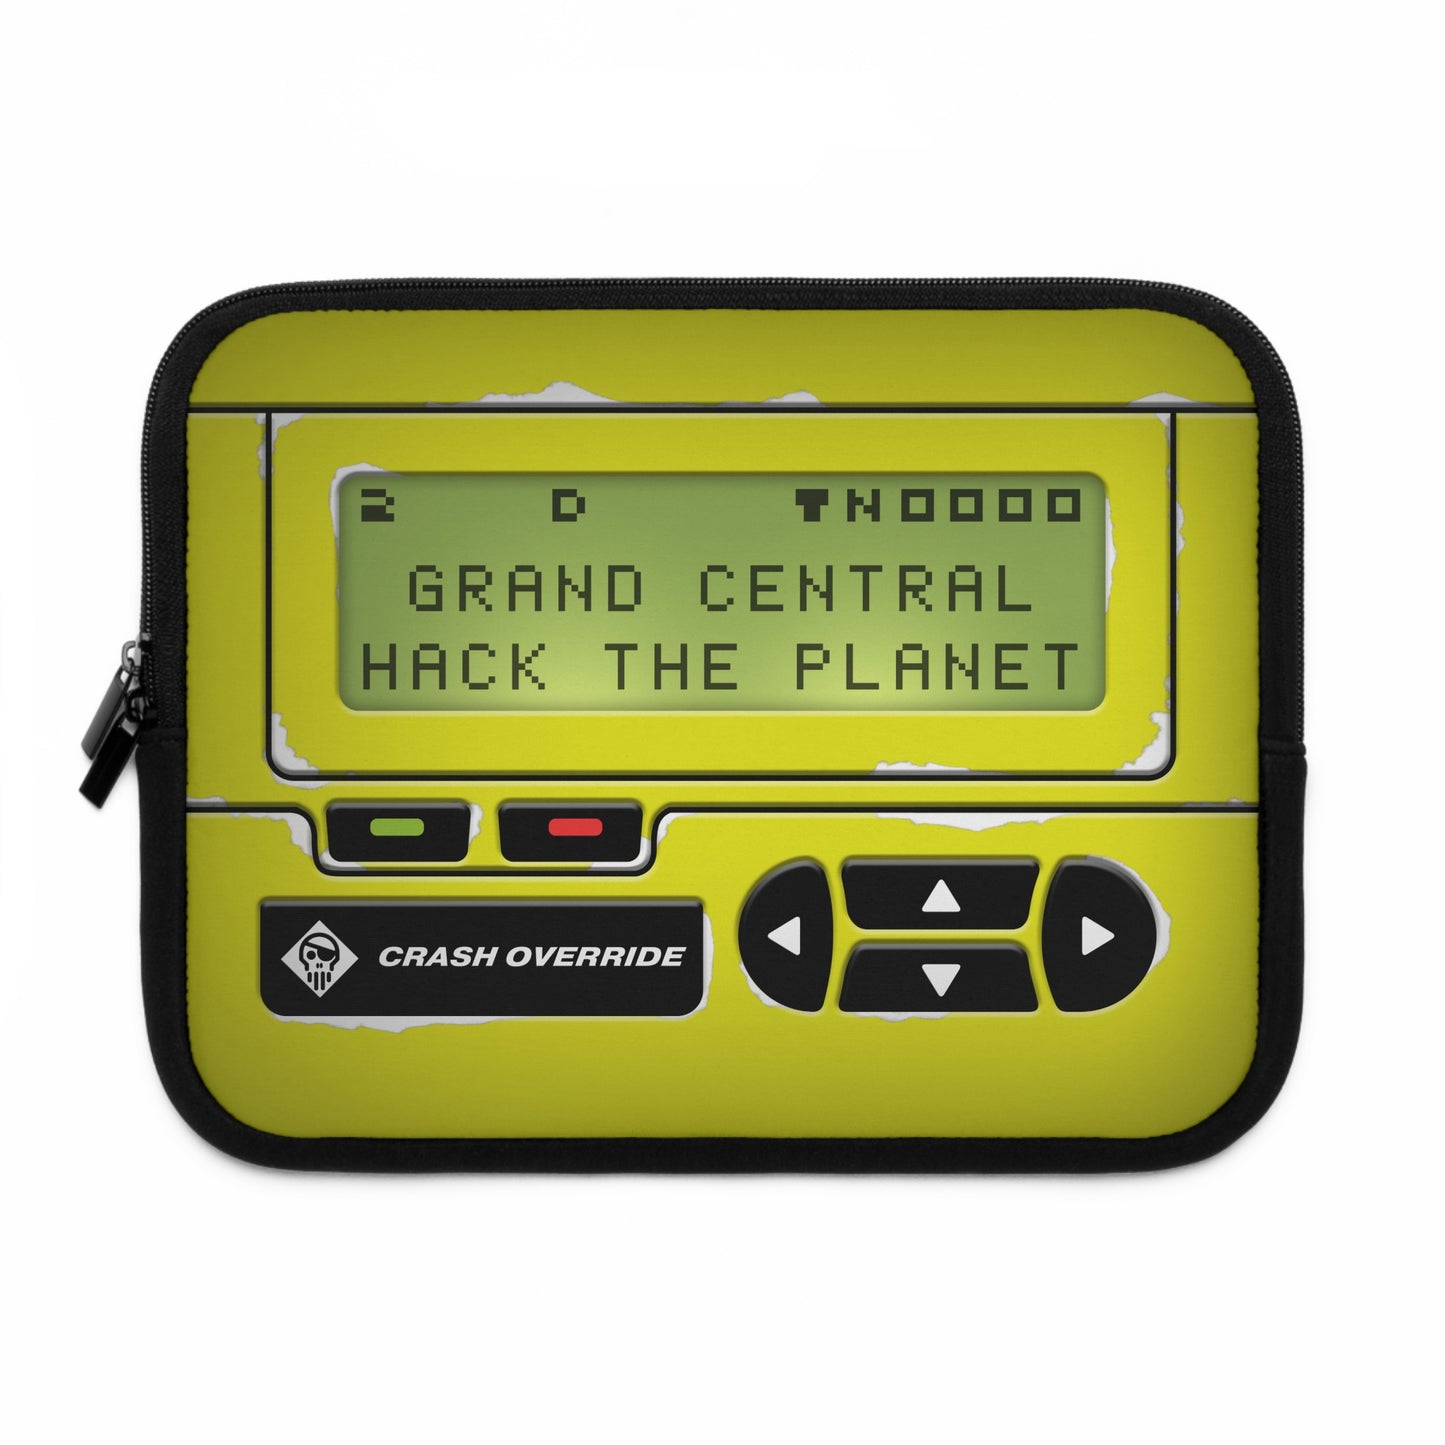 Hack the Planet tablet and laptop sleeve